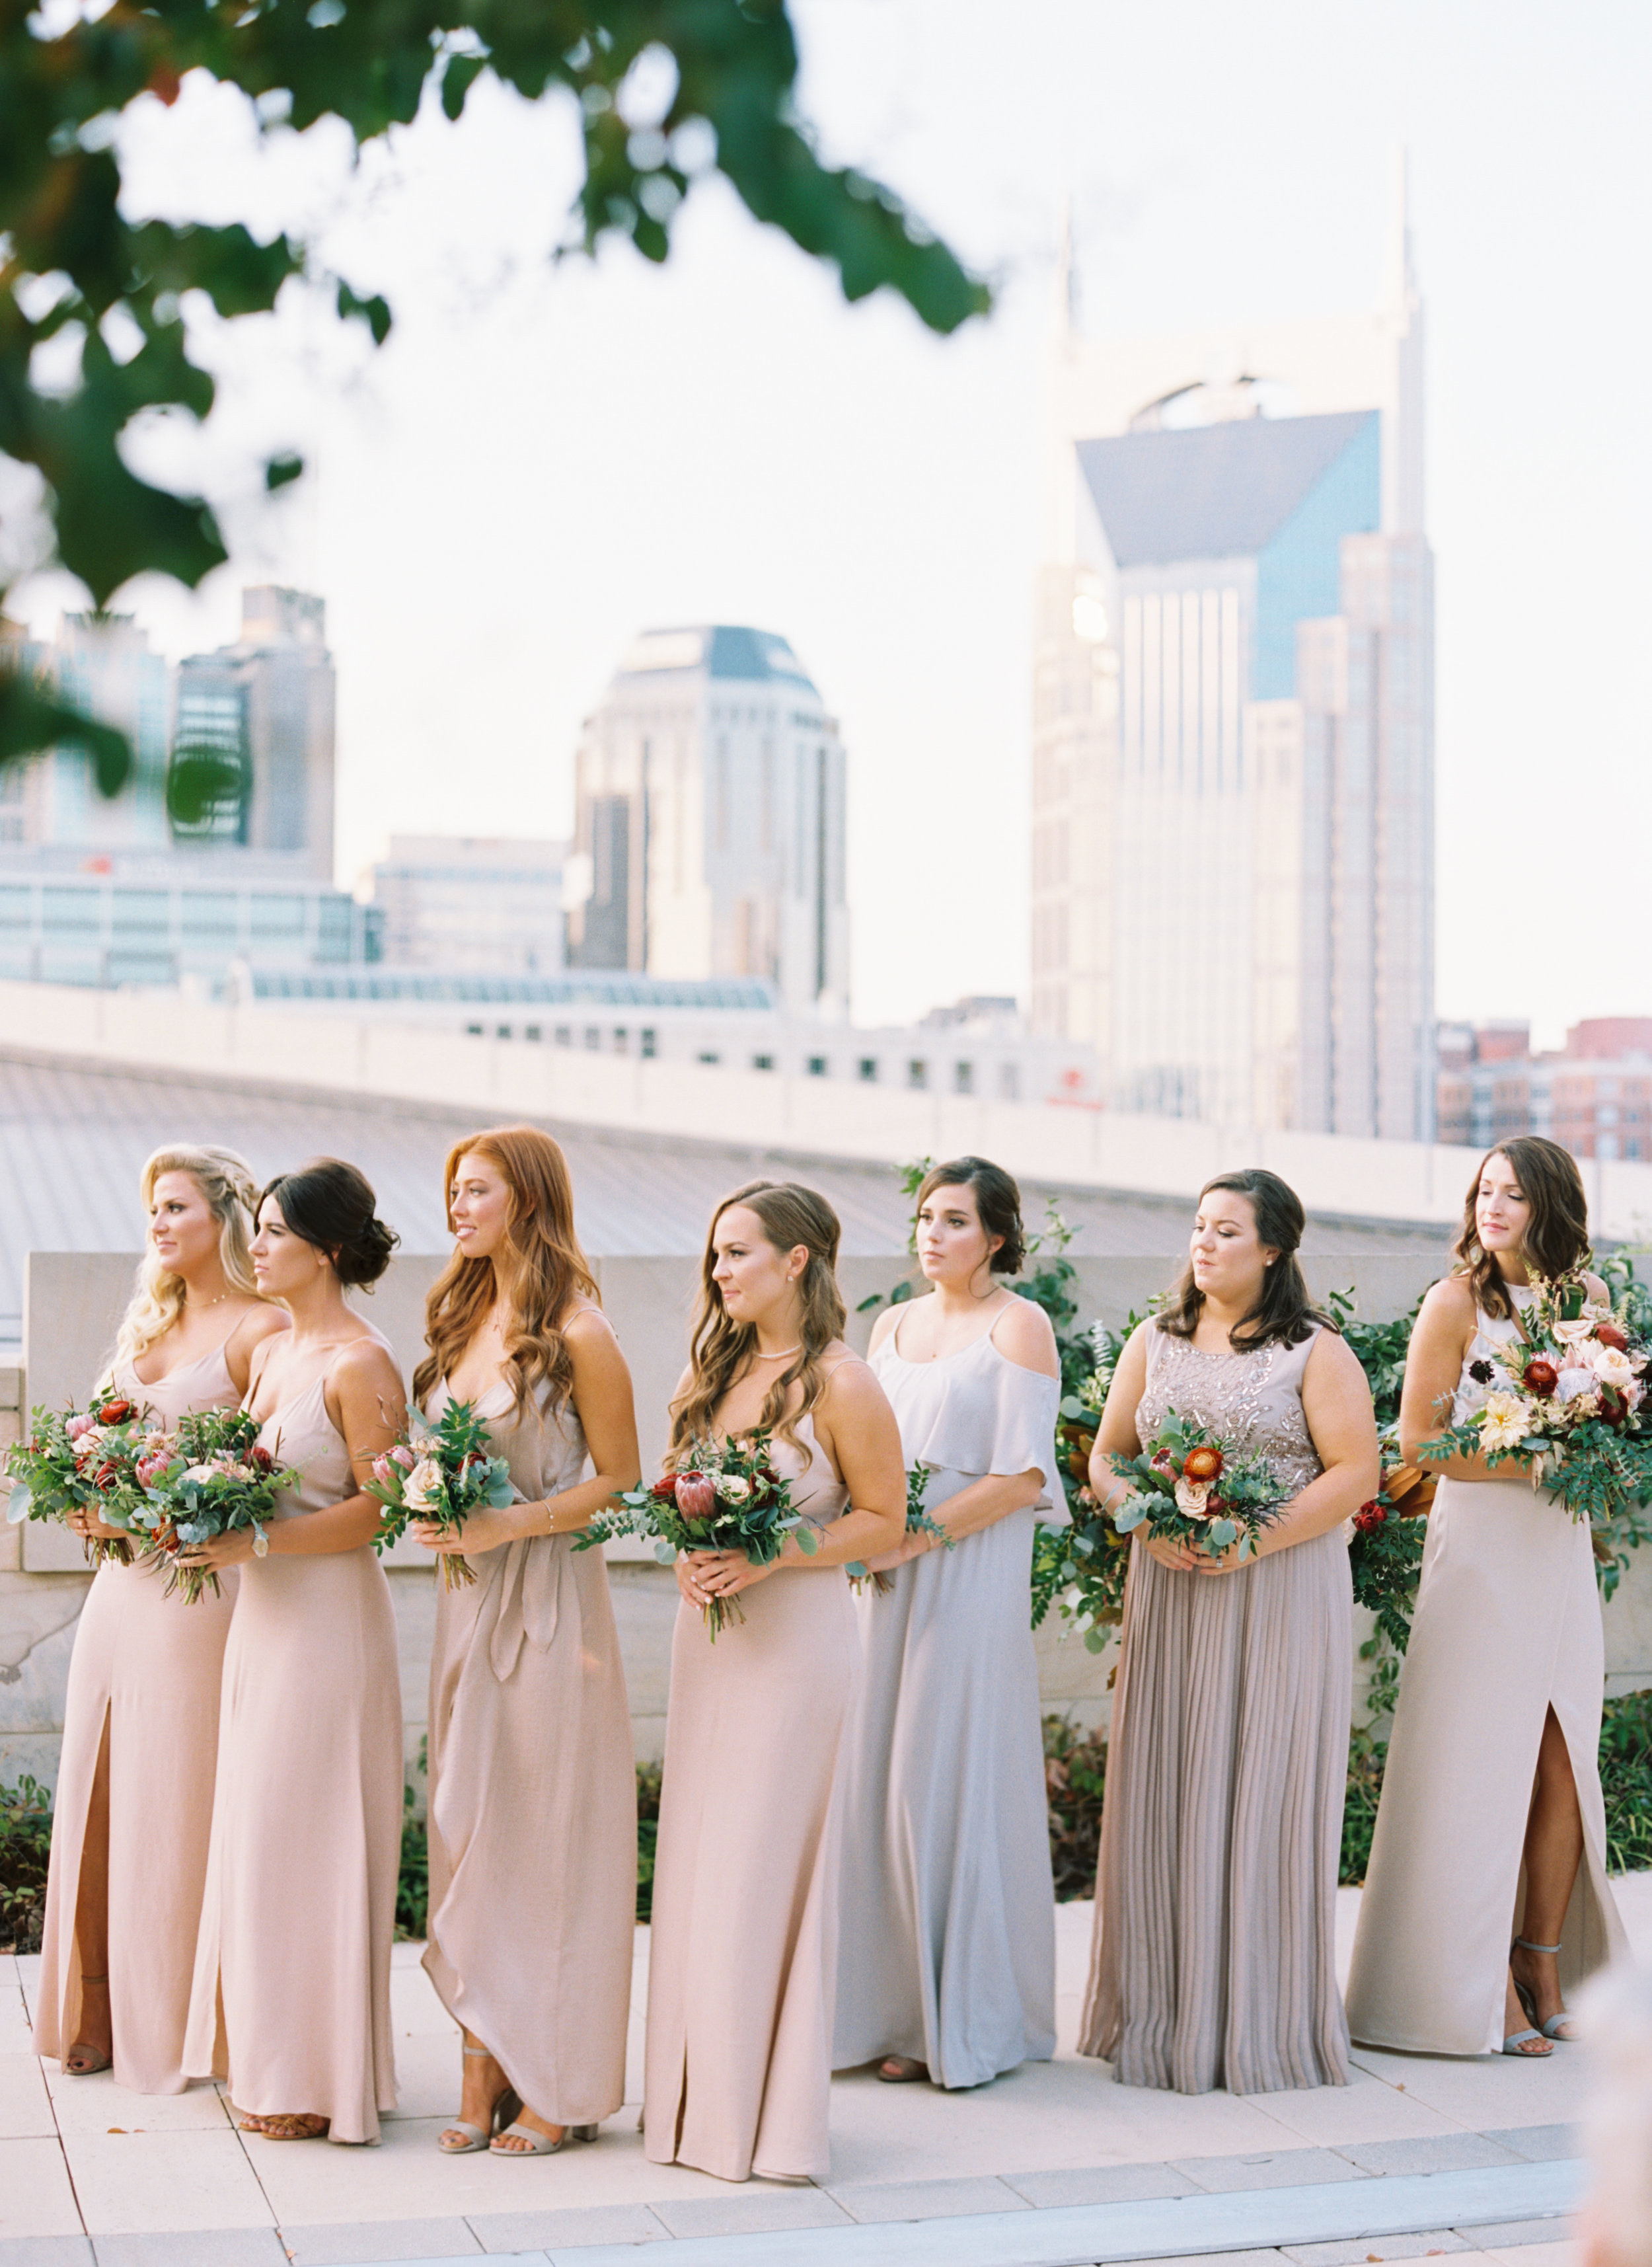 Blush and marsala wedding flowers with protea, ranunculus, and lots of greenery and texture // Country Music Hall of Fame Wedding, Nashville